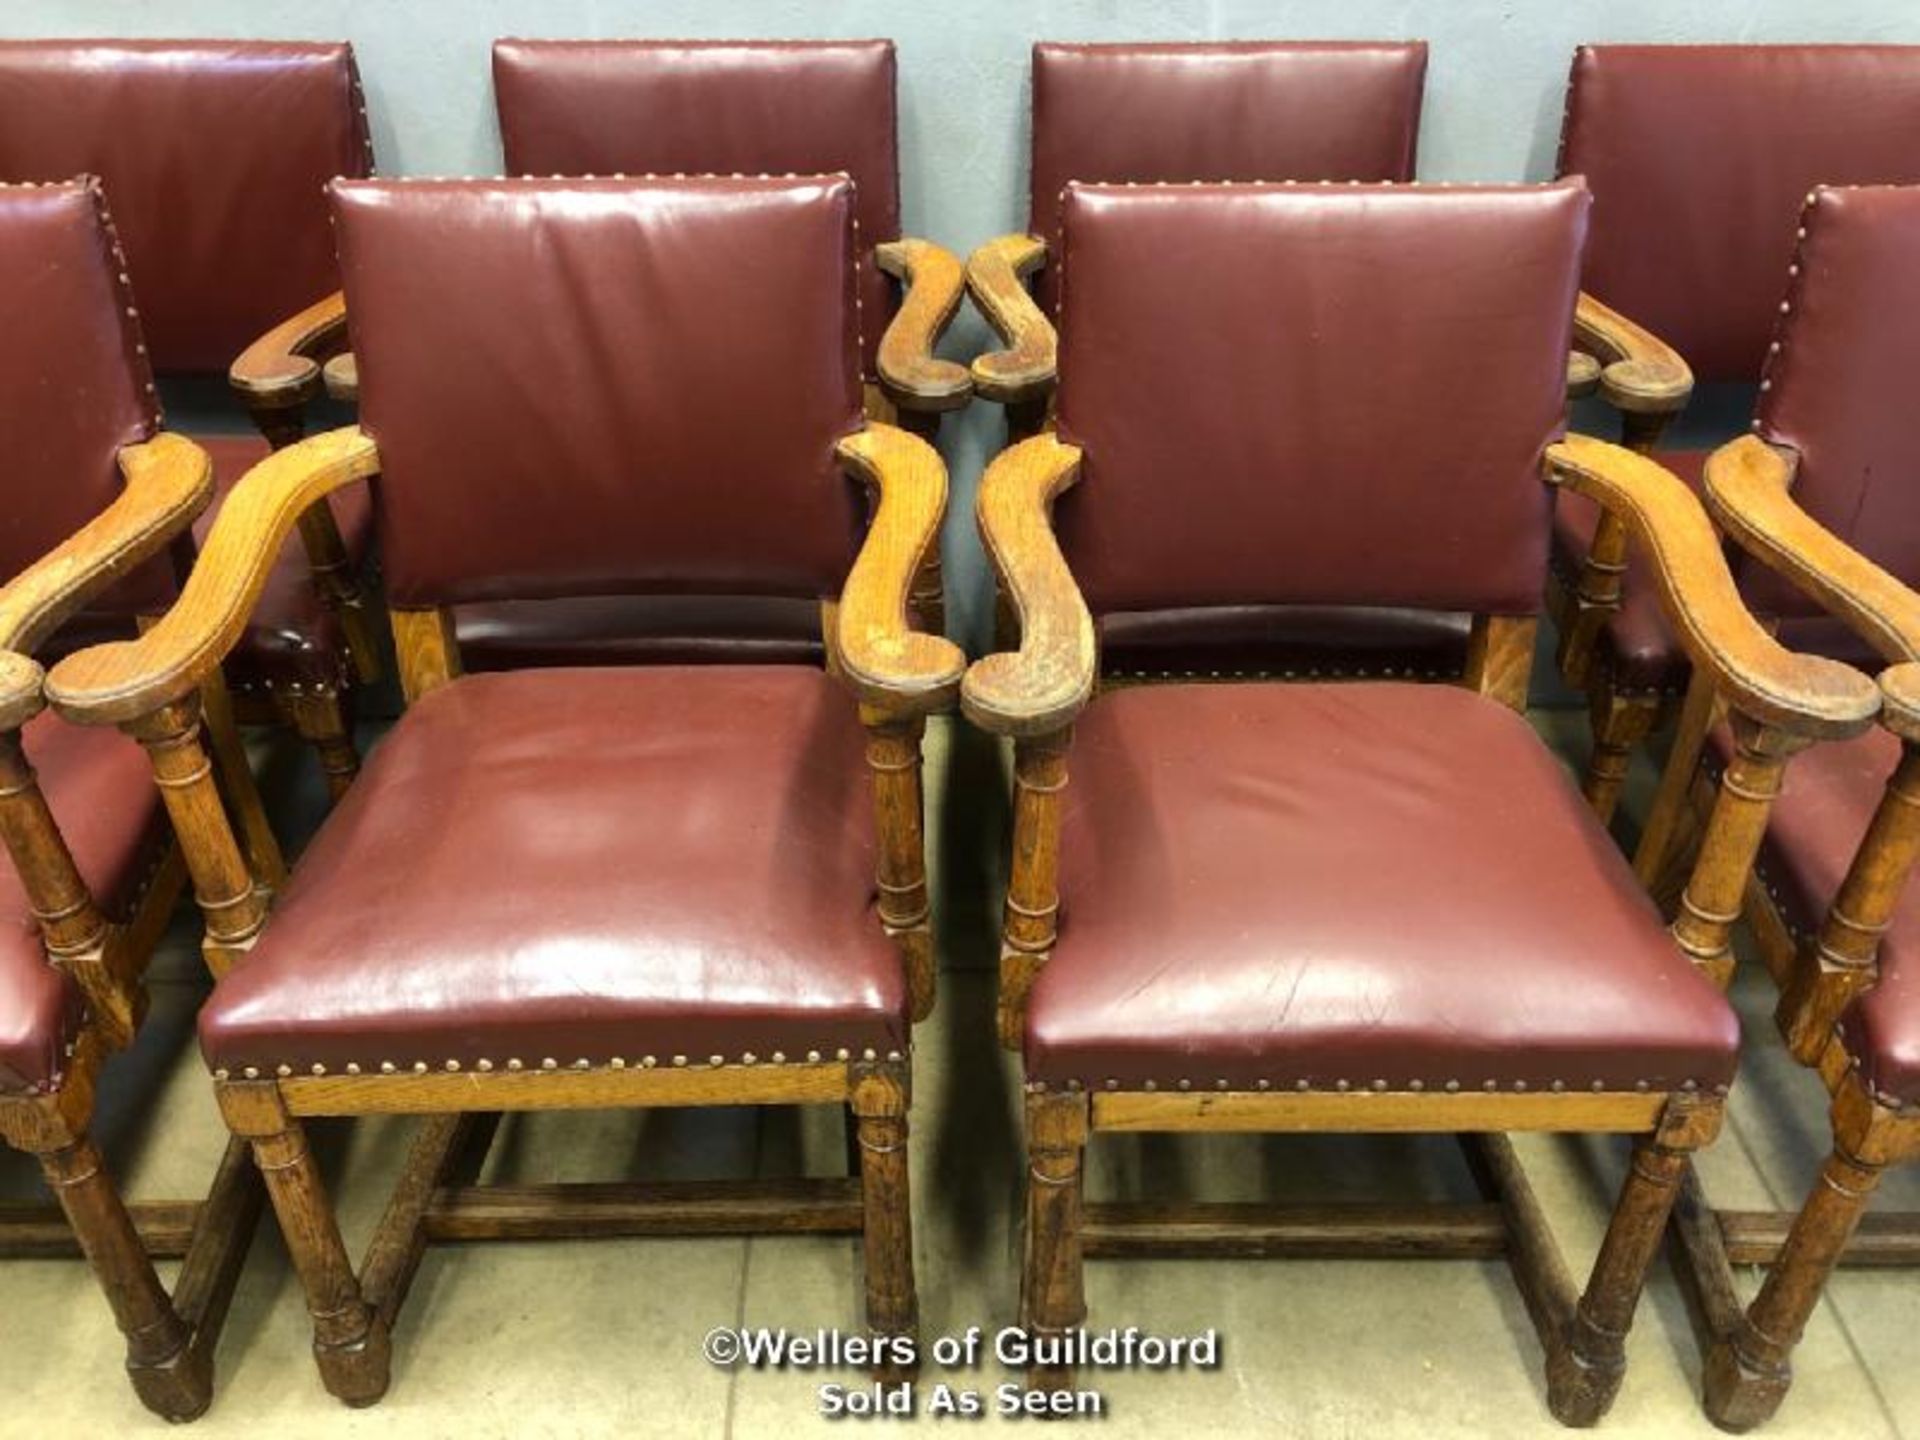 *X4 OAK CARVER CHAIRS WITH BURGANDY LEATHER UPHOLSTERED SEATS - 91CM H X 59CM W X 50CM D